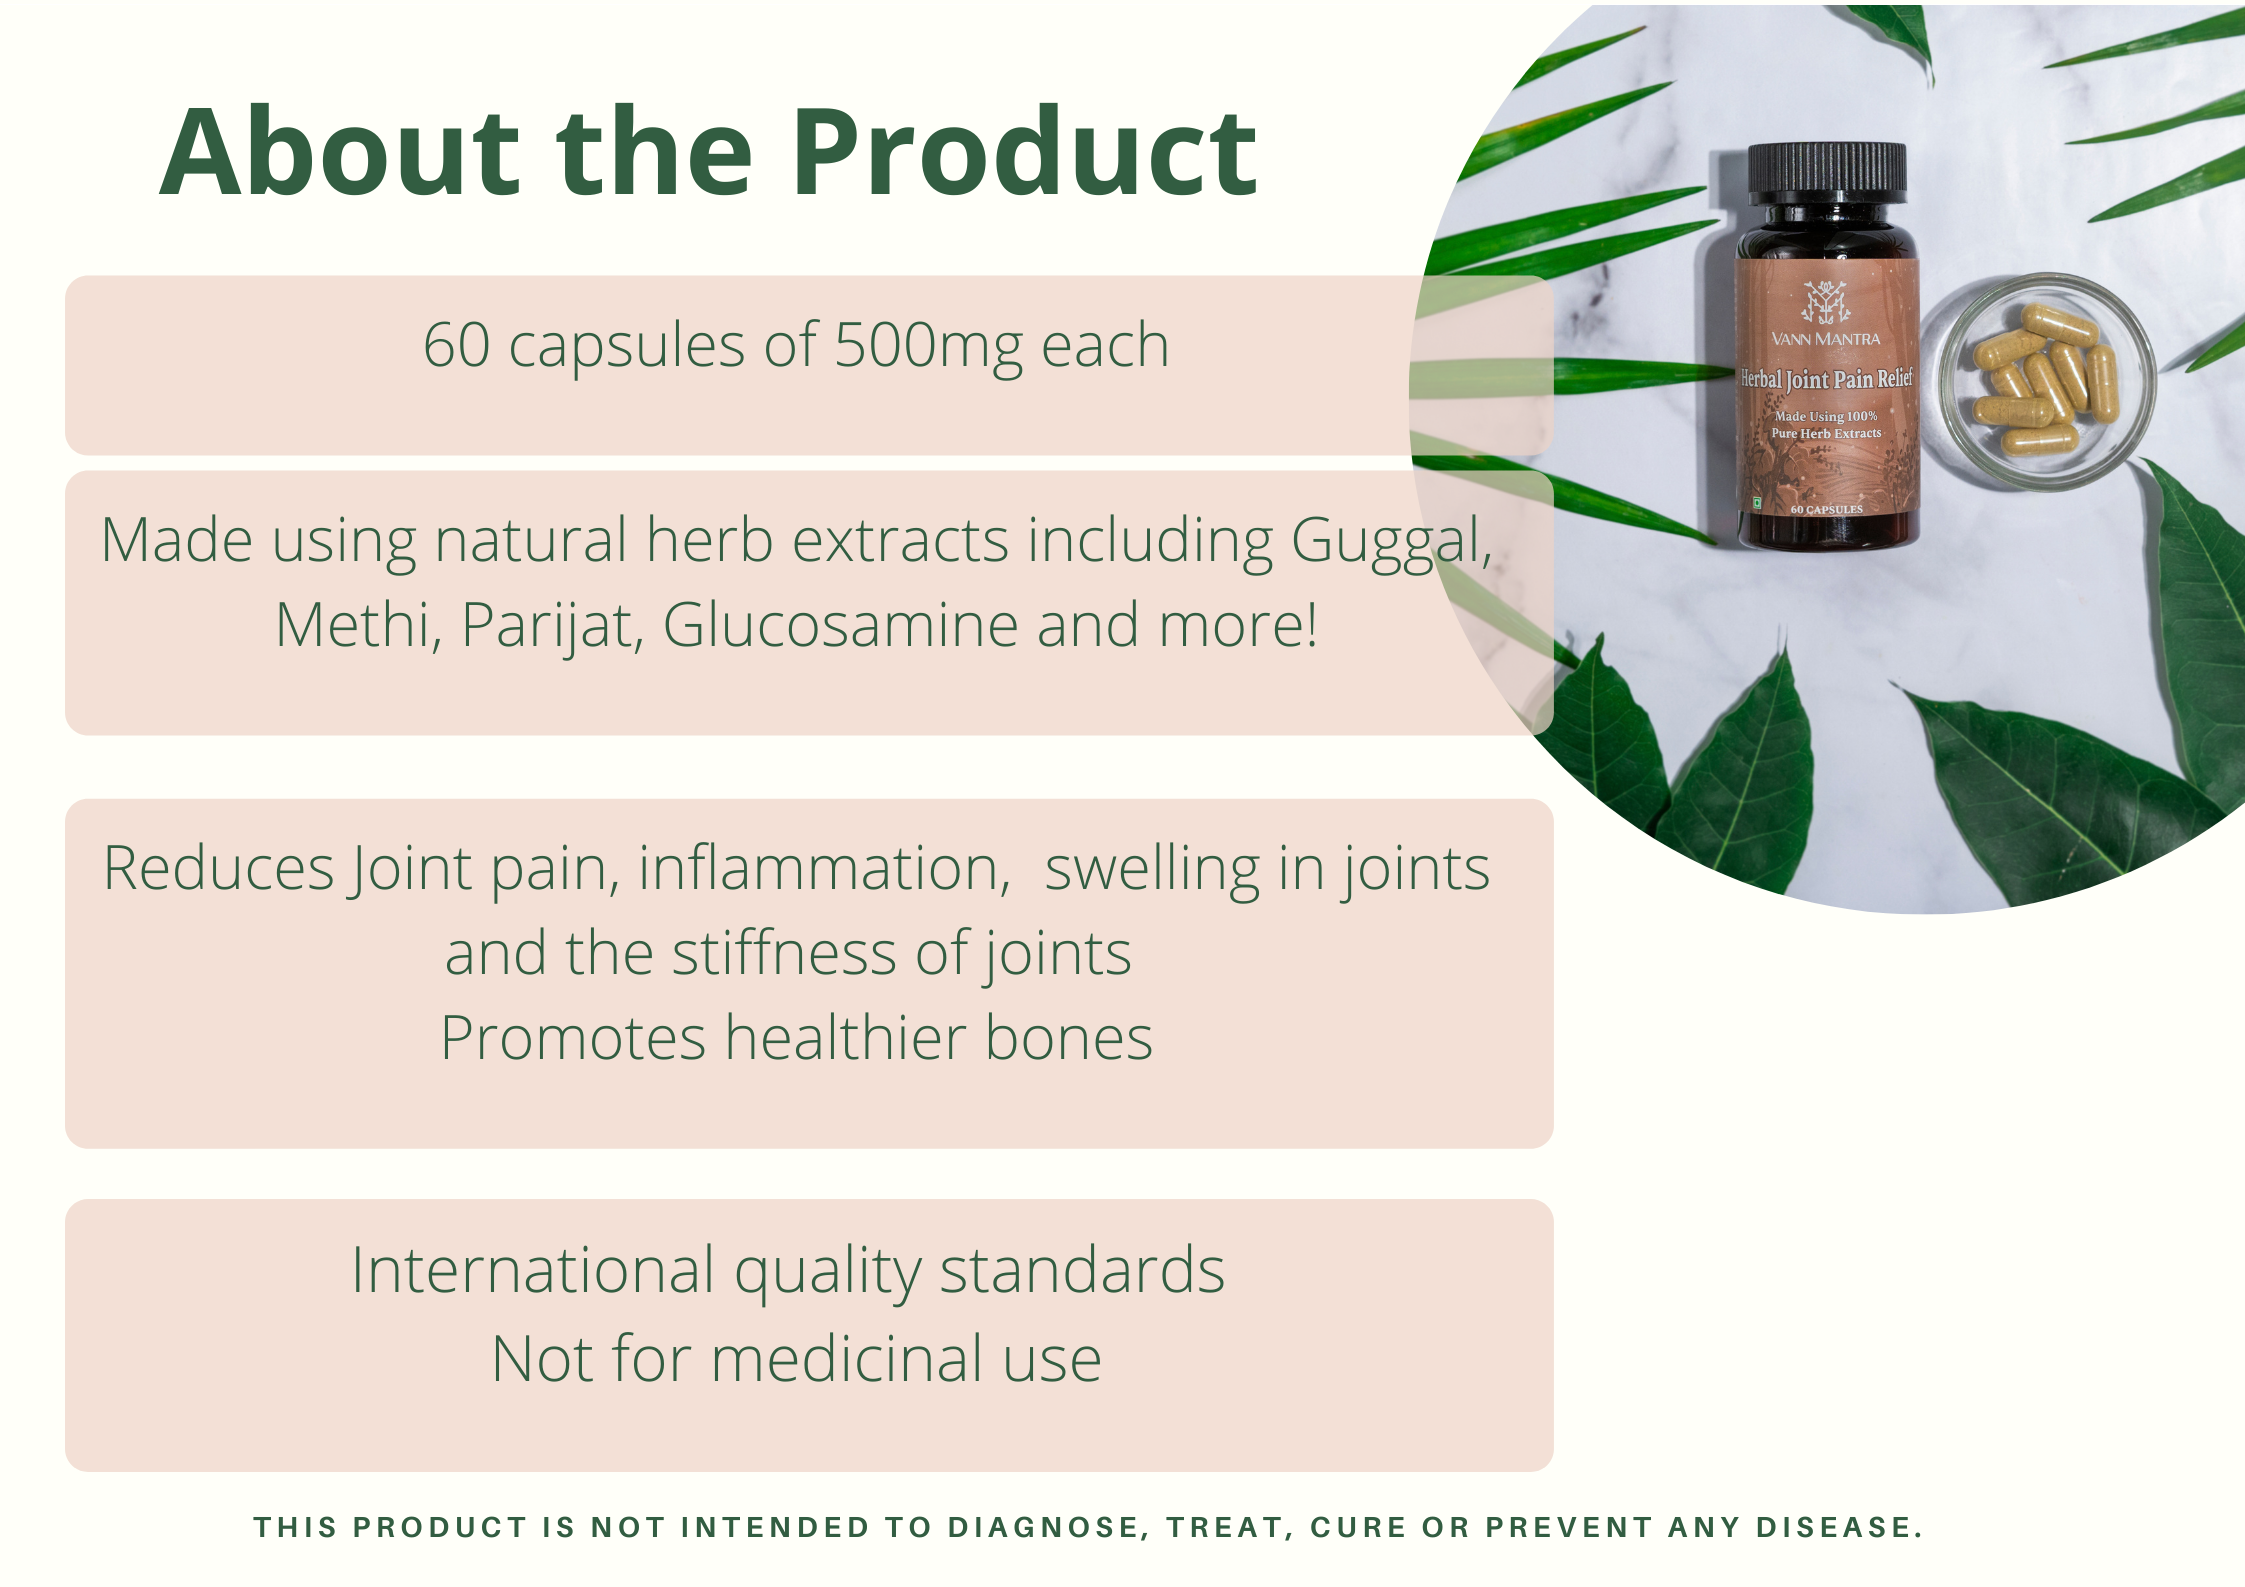 Infographic explaining the features and benefits of Herbal Joint Pain Relief Capsules.